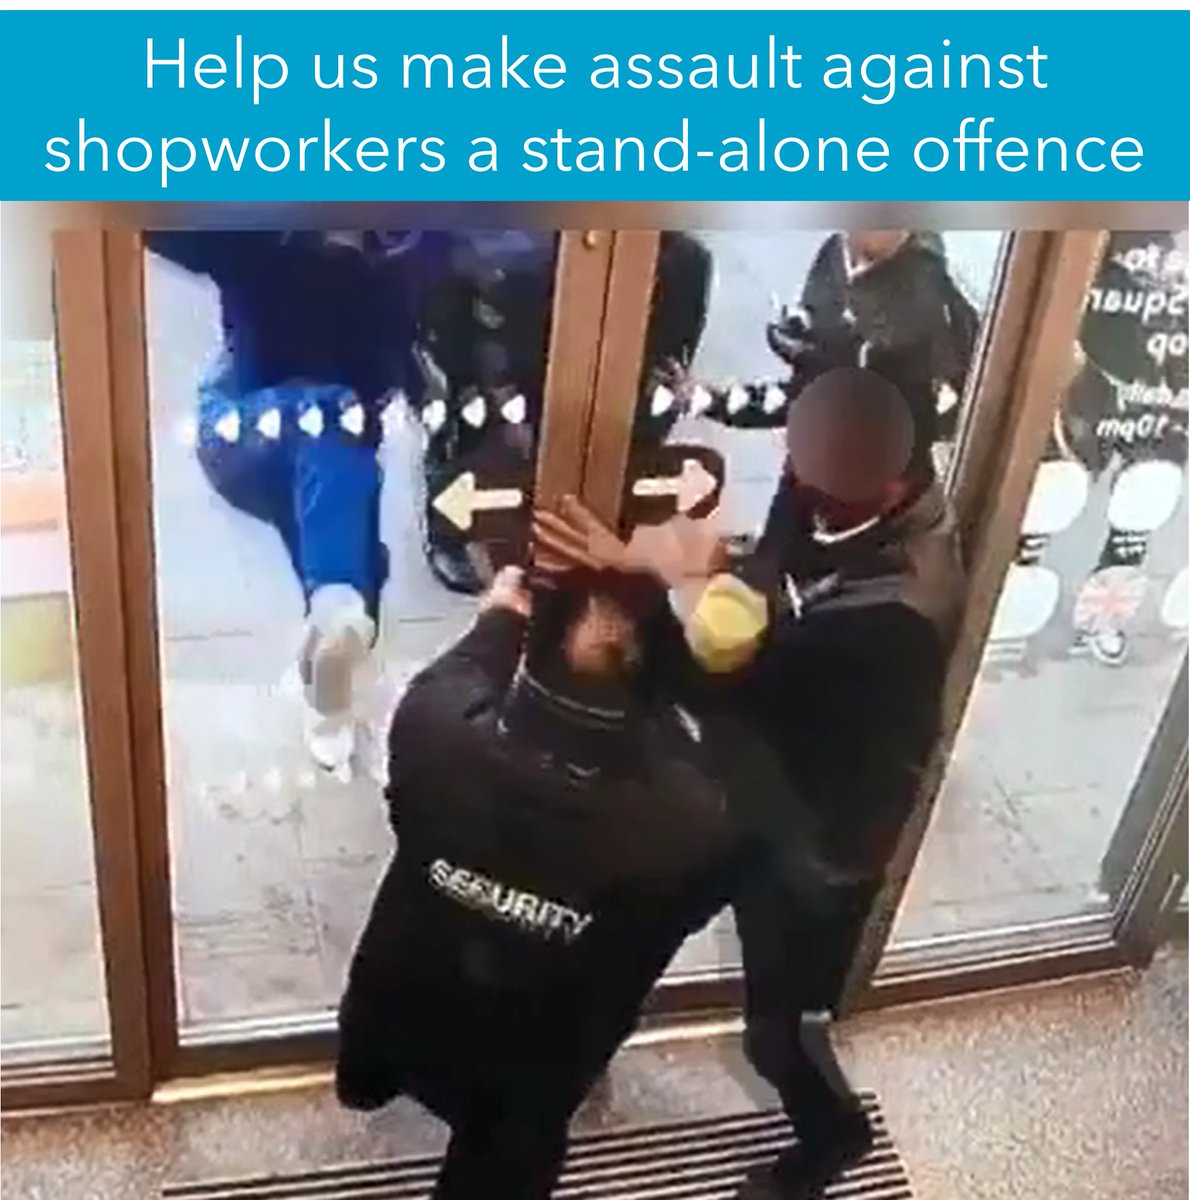 Please tell your local MP to back the amendment to the Criminal Justice Bill. The amendment would see assault against shopworkers become a stand-alone offence, and help us take action to keep all retail colleagues and communities safe: coop.uk/48bJ283